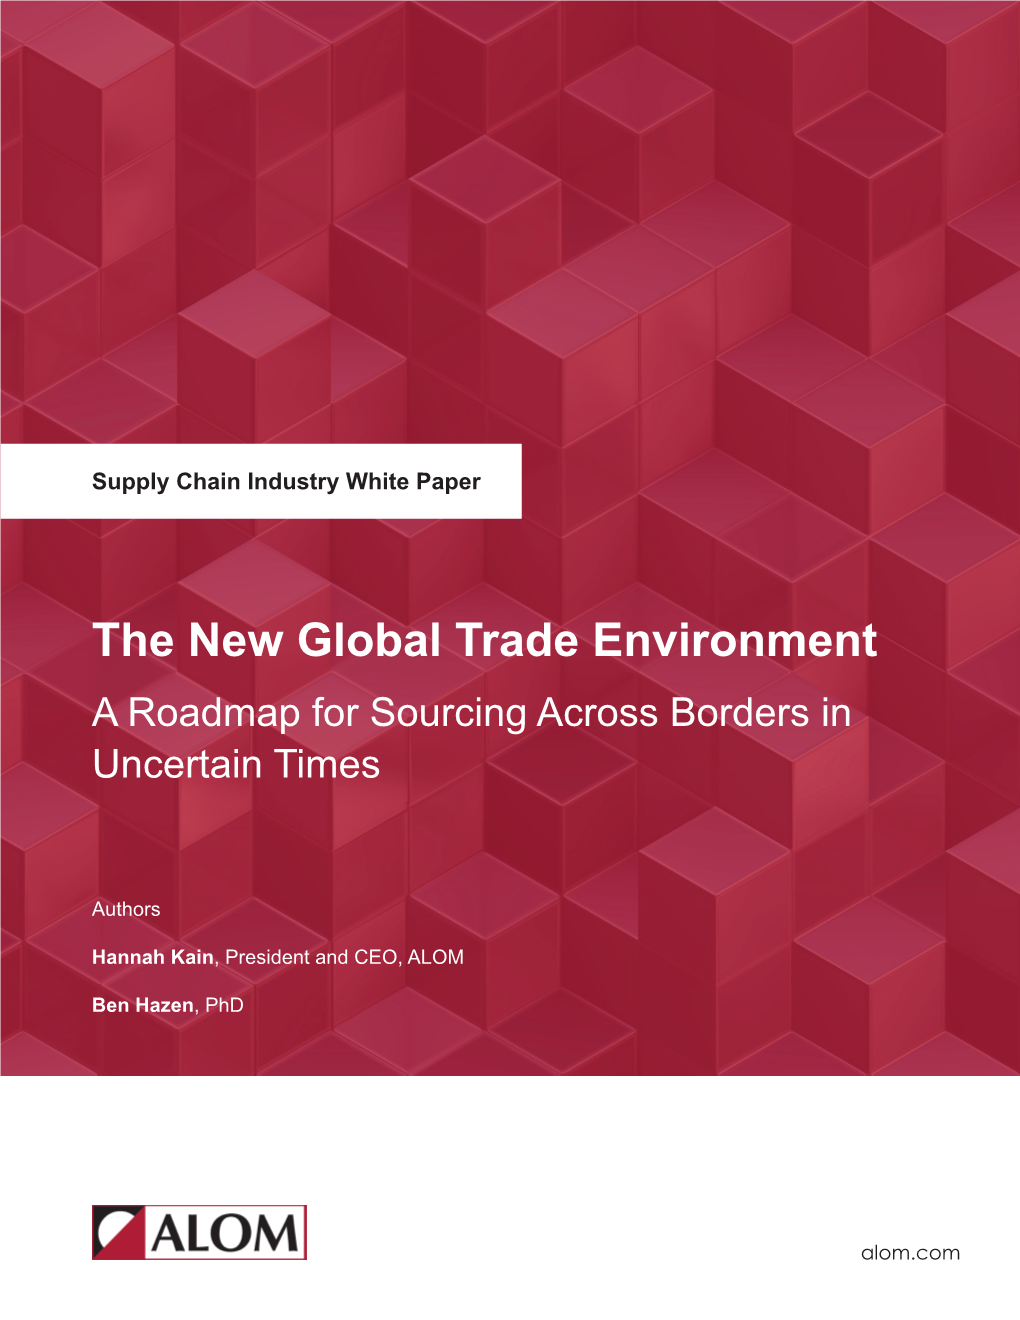 The New Global Trade Environment a Roadmap for Sourcing Across Borders in Uncertain Times